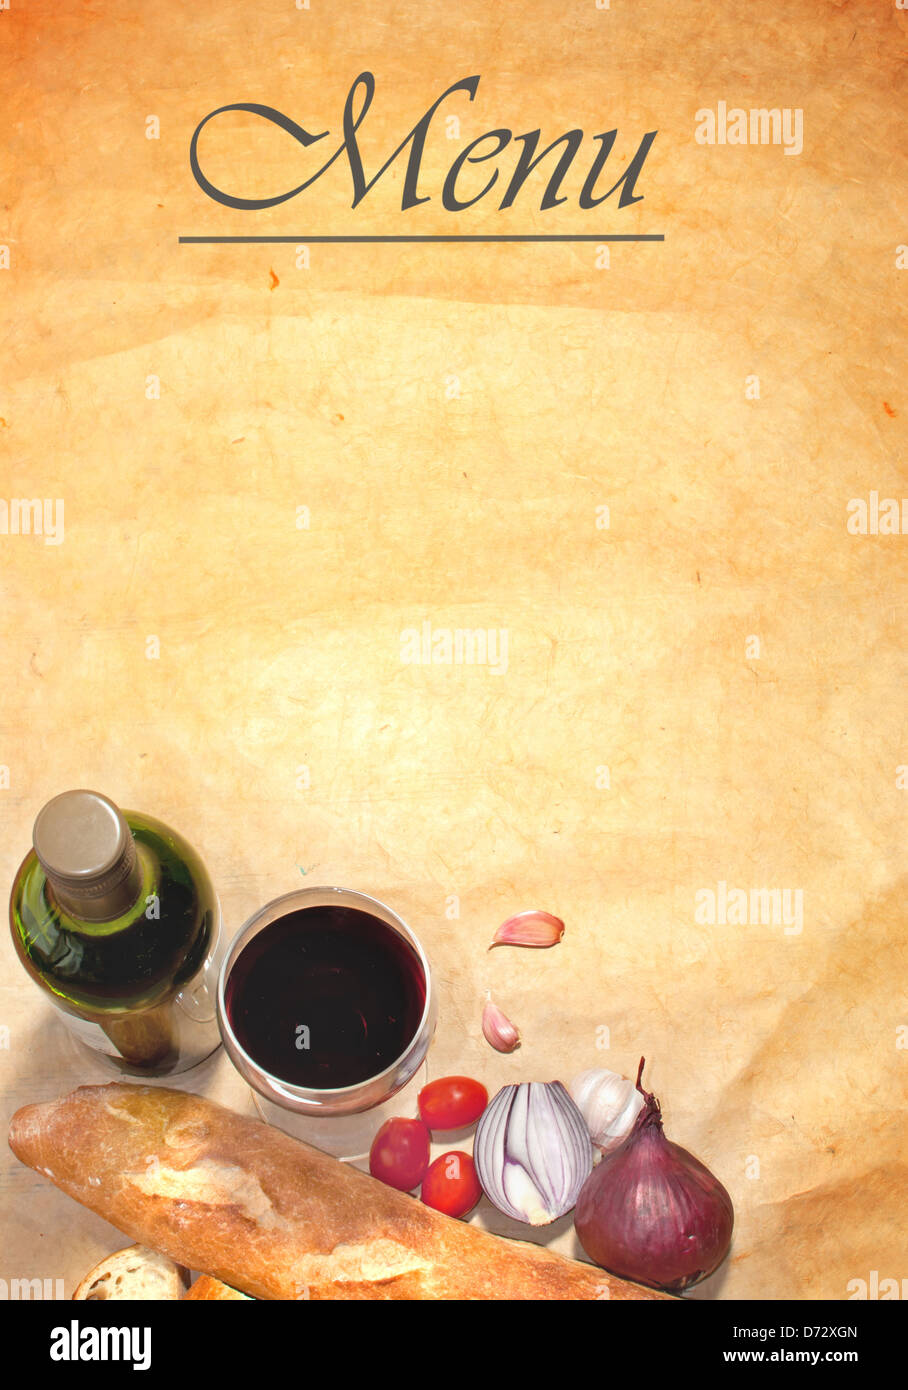 Menu background frame with basic ingredients including bread, onions and red wine Stock Photo